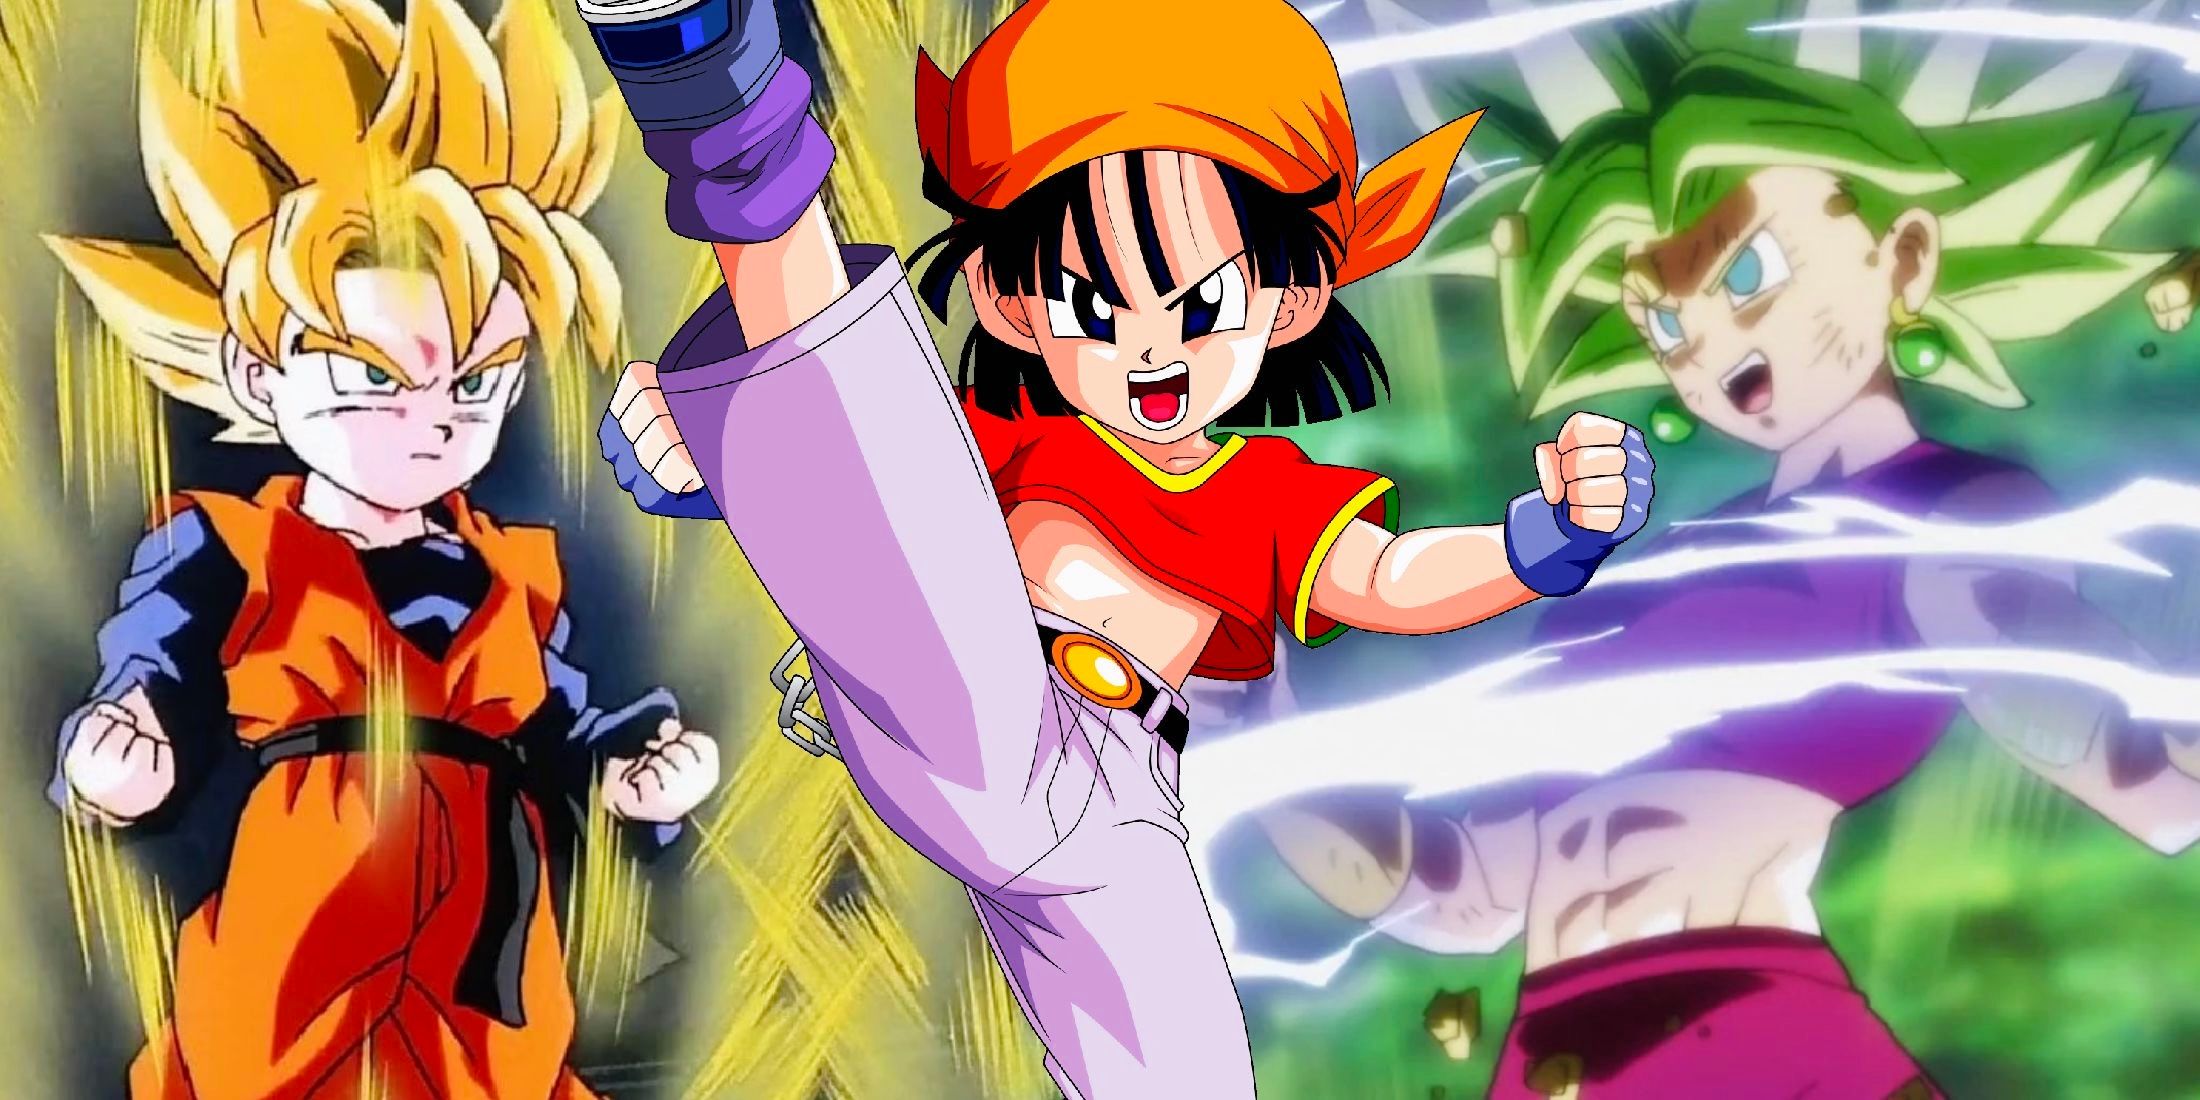 Pan kicking an enemy in Dragon Ball GT with Goten SSJ from DBZ and Kefla from Super